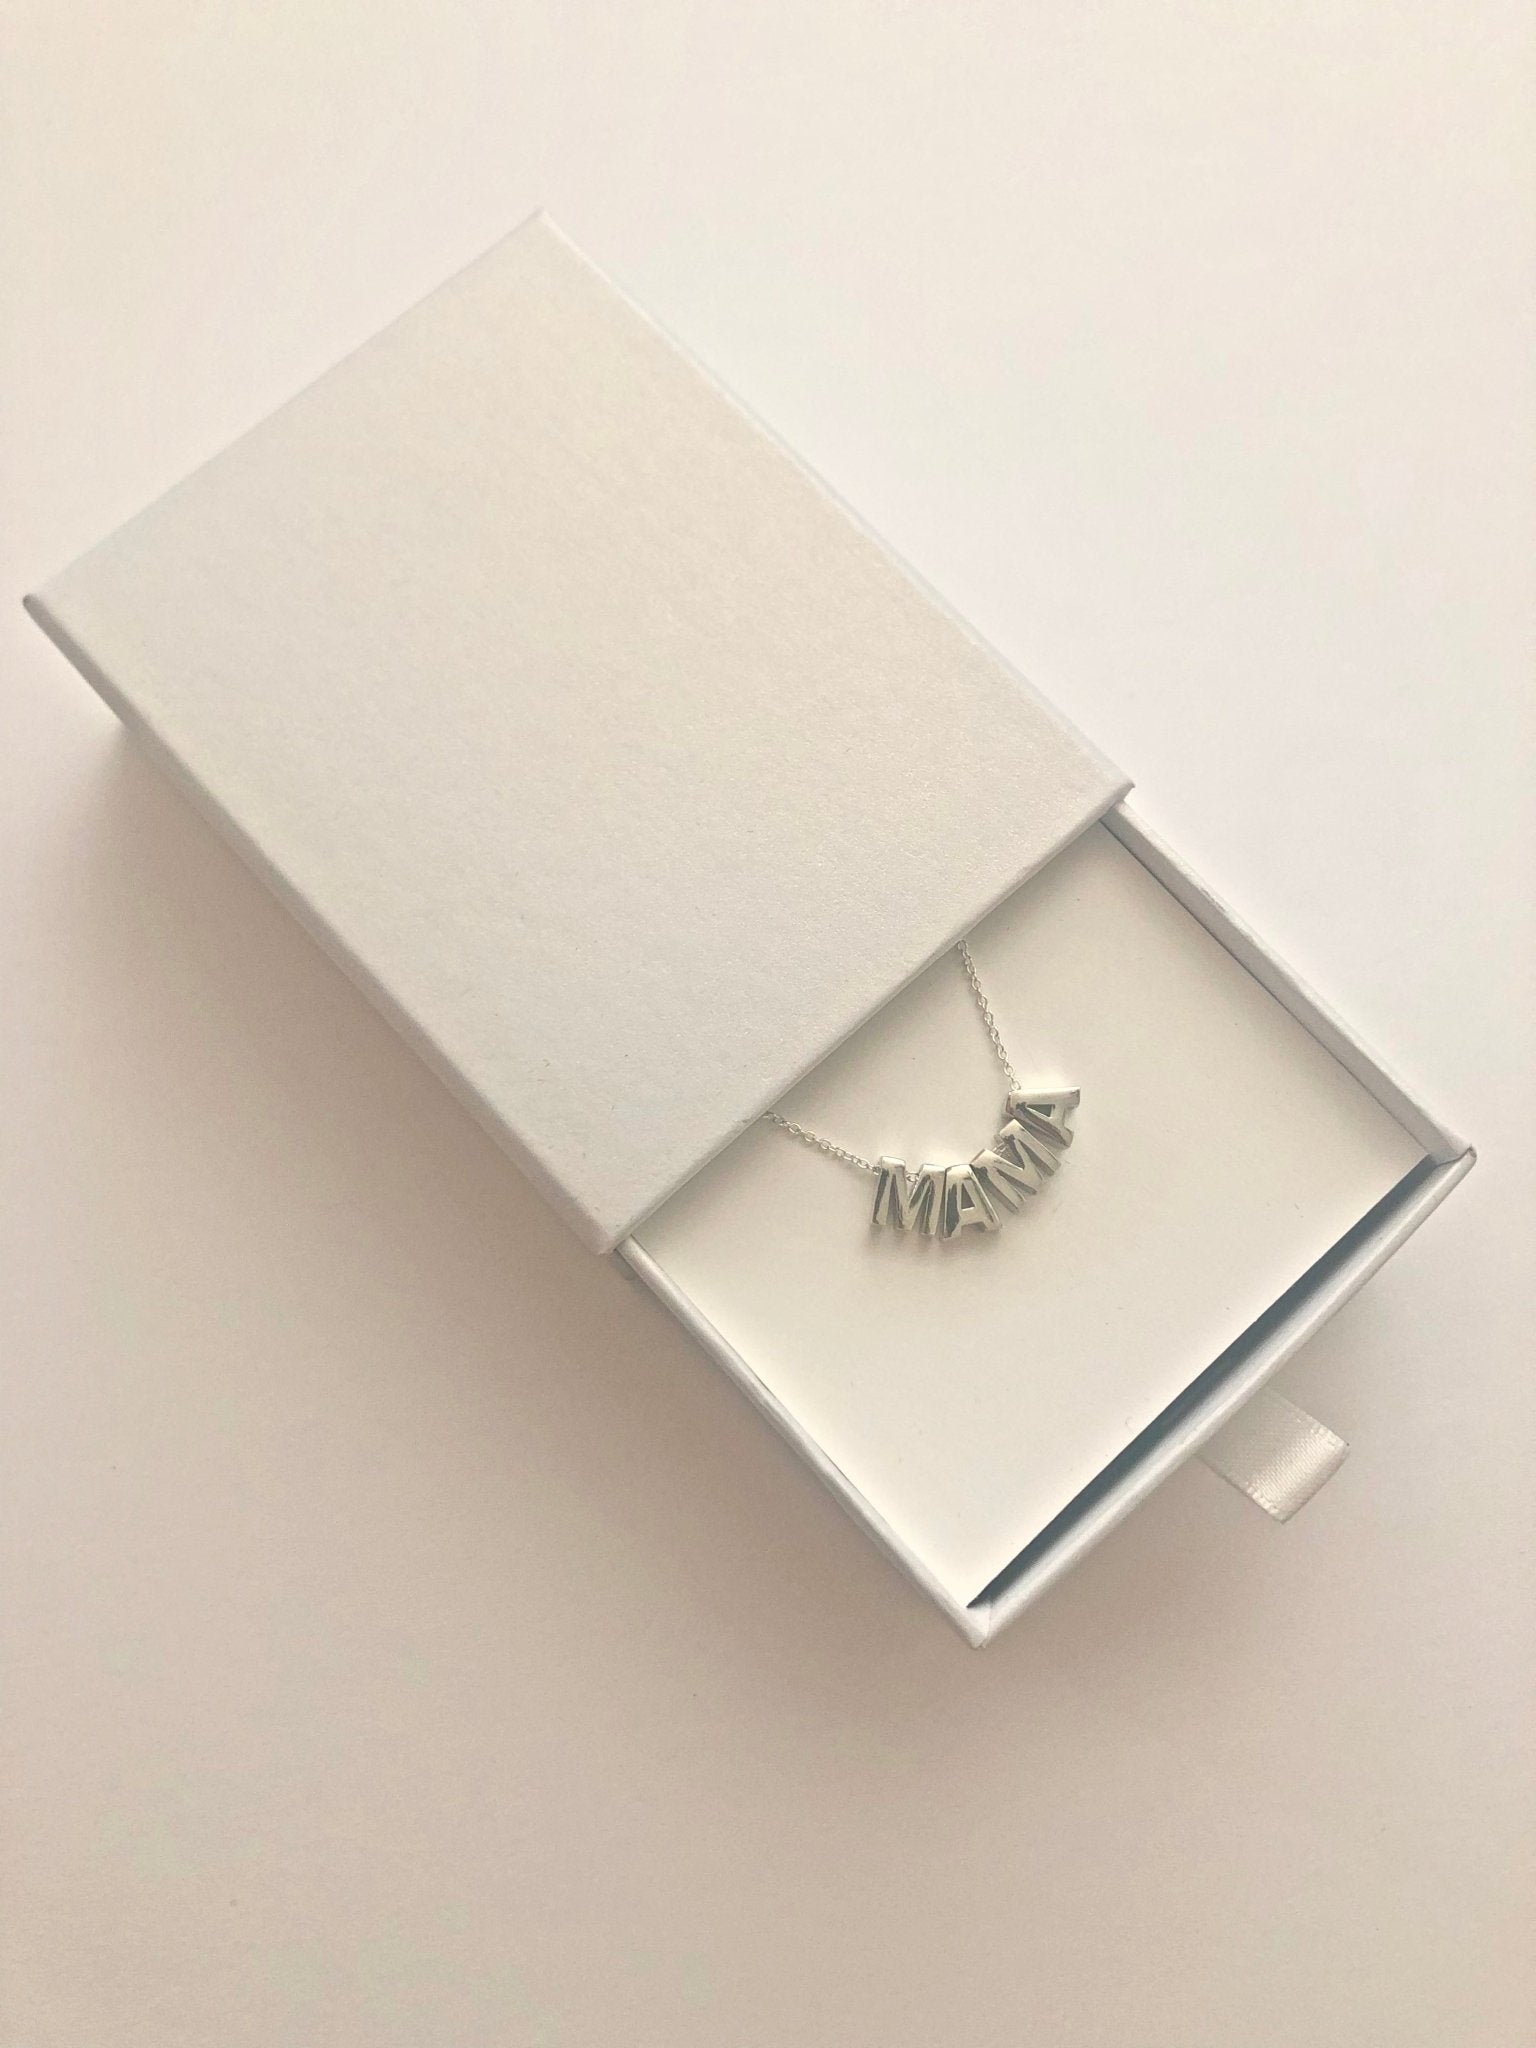 Larissa Loden MAMA Necklace in Gift Box - The Kindness Cause